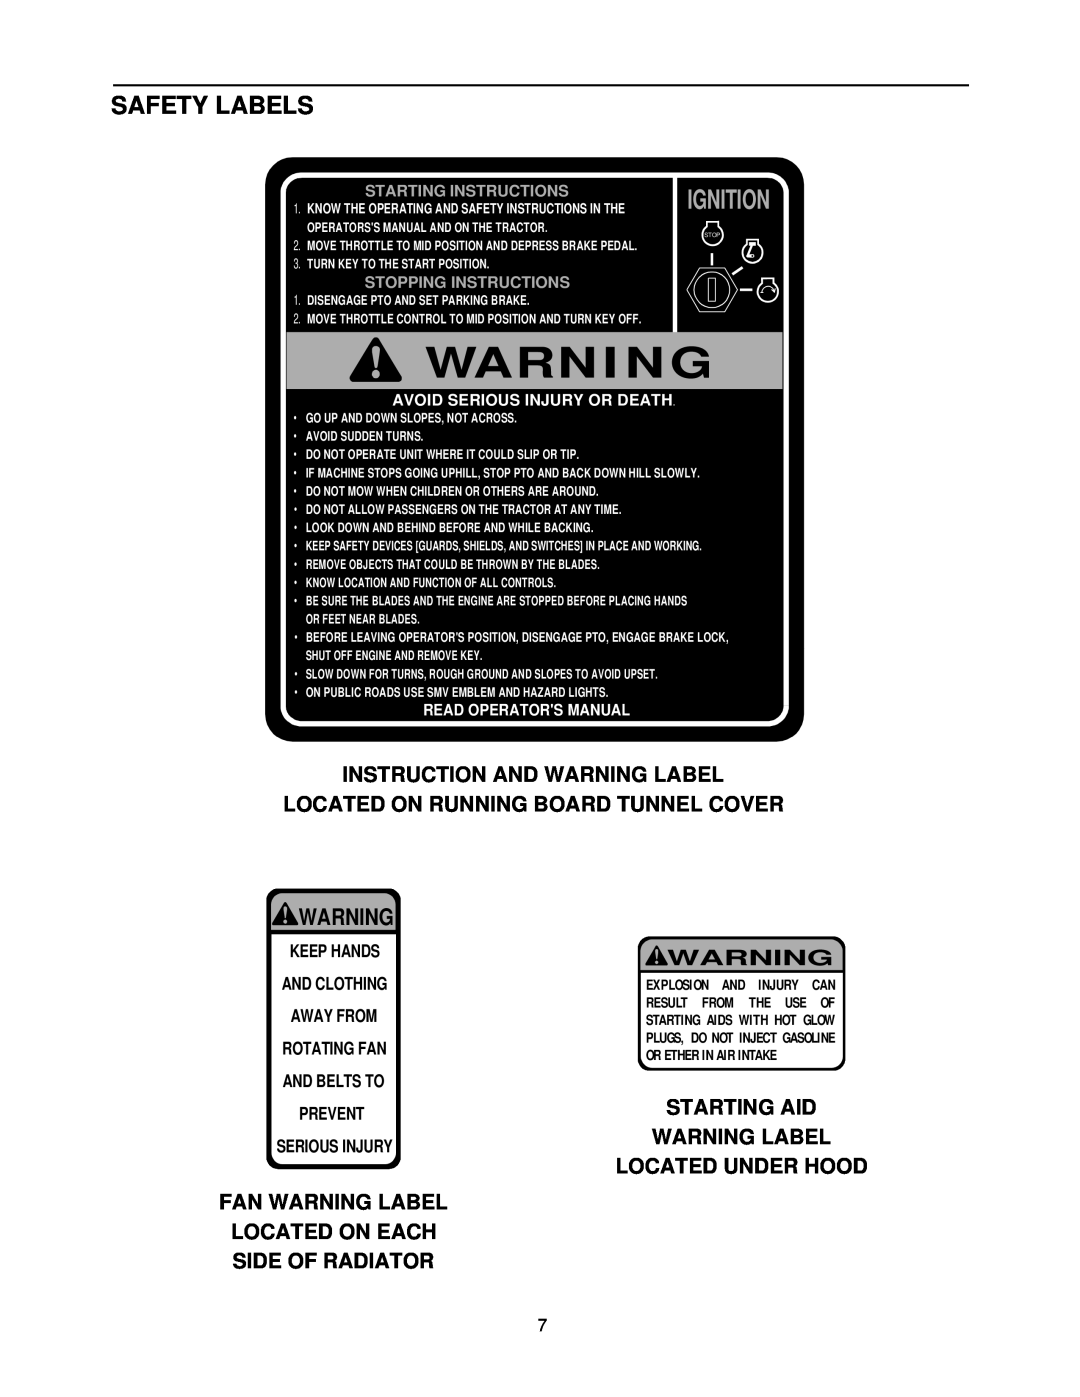 Cub Cadet 7252 Warni Ng, Safety Labels, Instruction And Warning Label, Located On Running Board Tunnel Cover, Starting Aid 